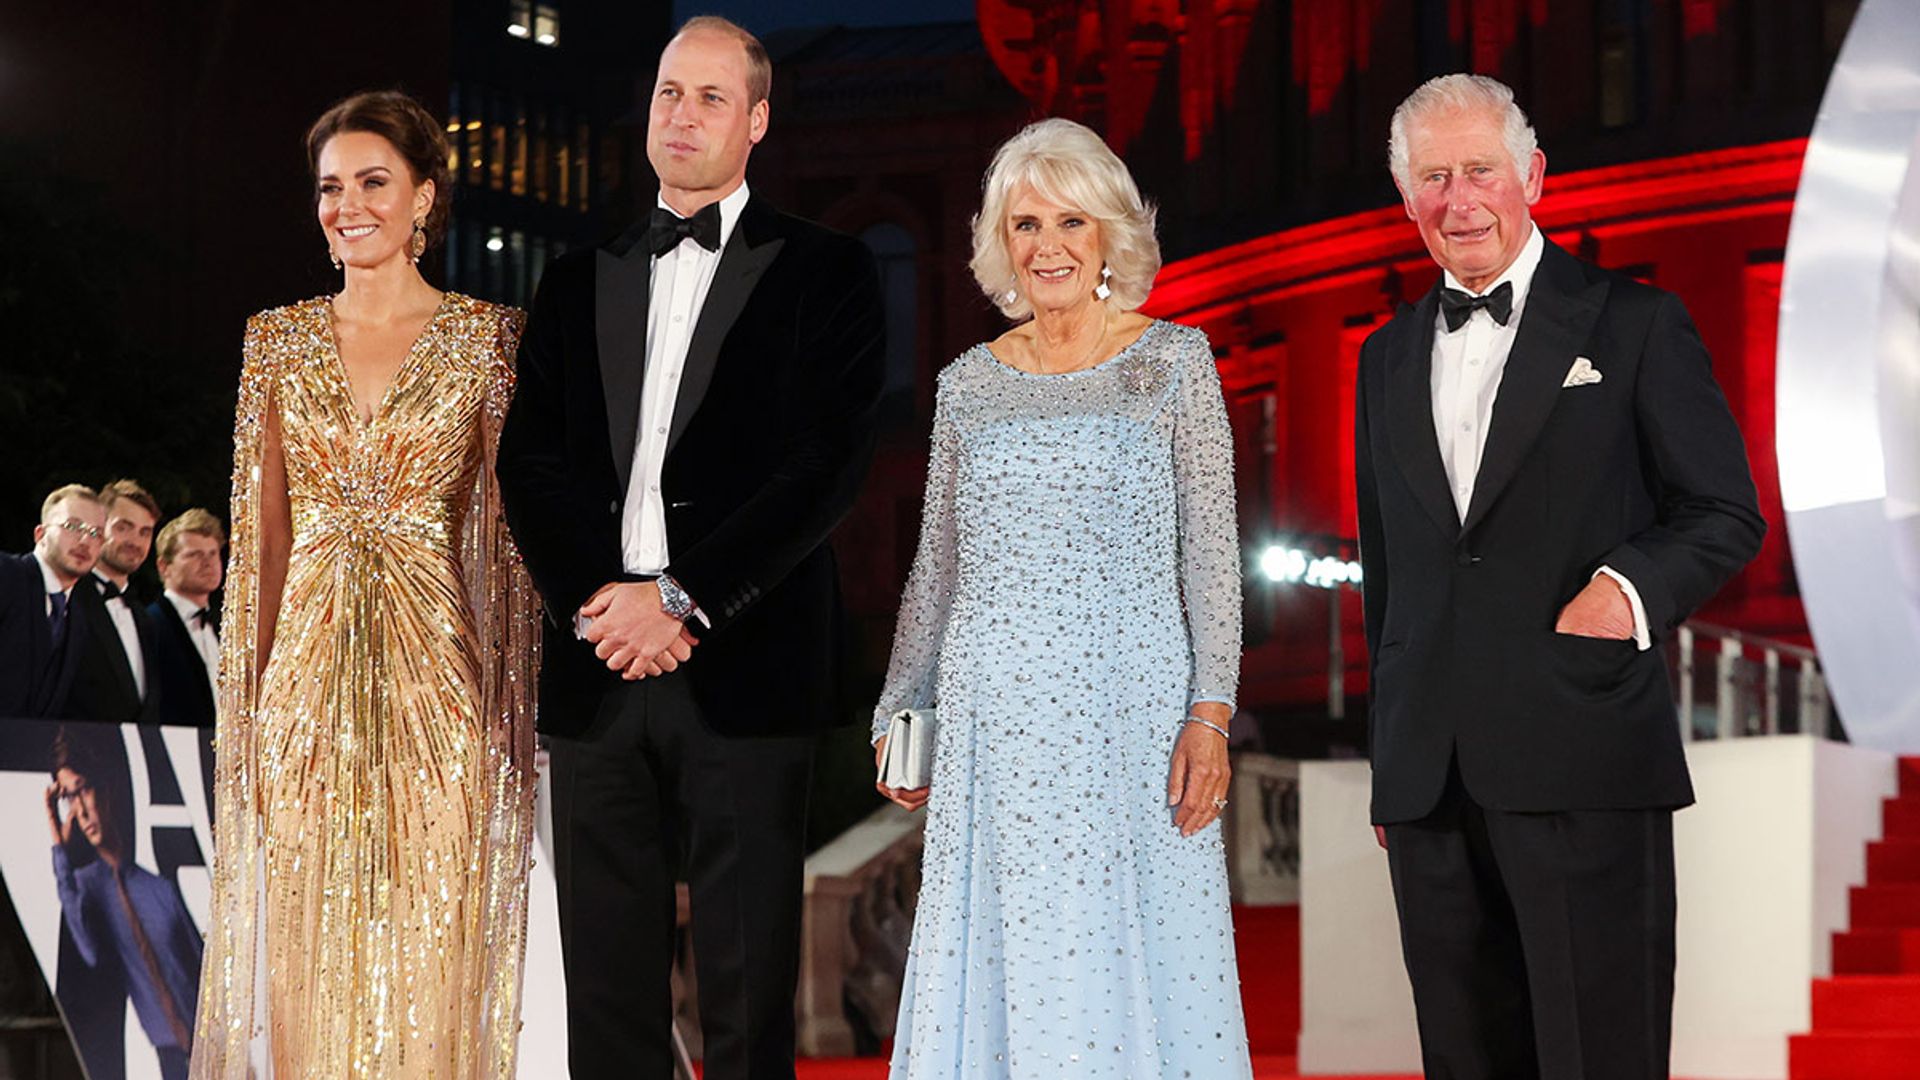 Prince Charles and Camilla share gorgeous photo to mark Kate Middleton's 40th birthday